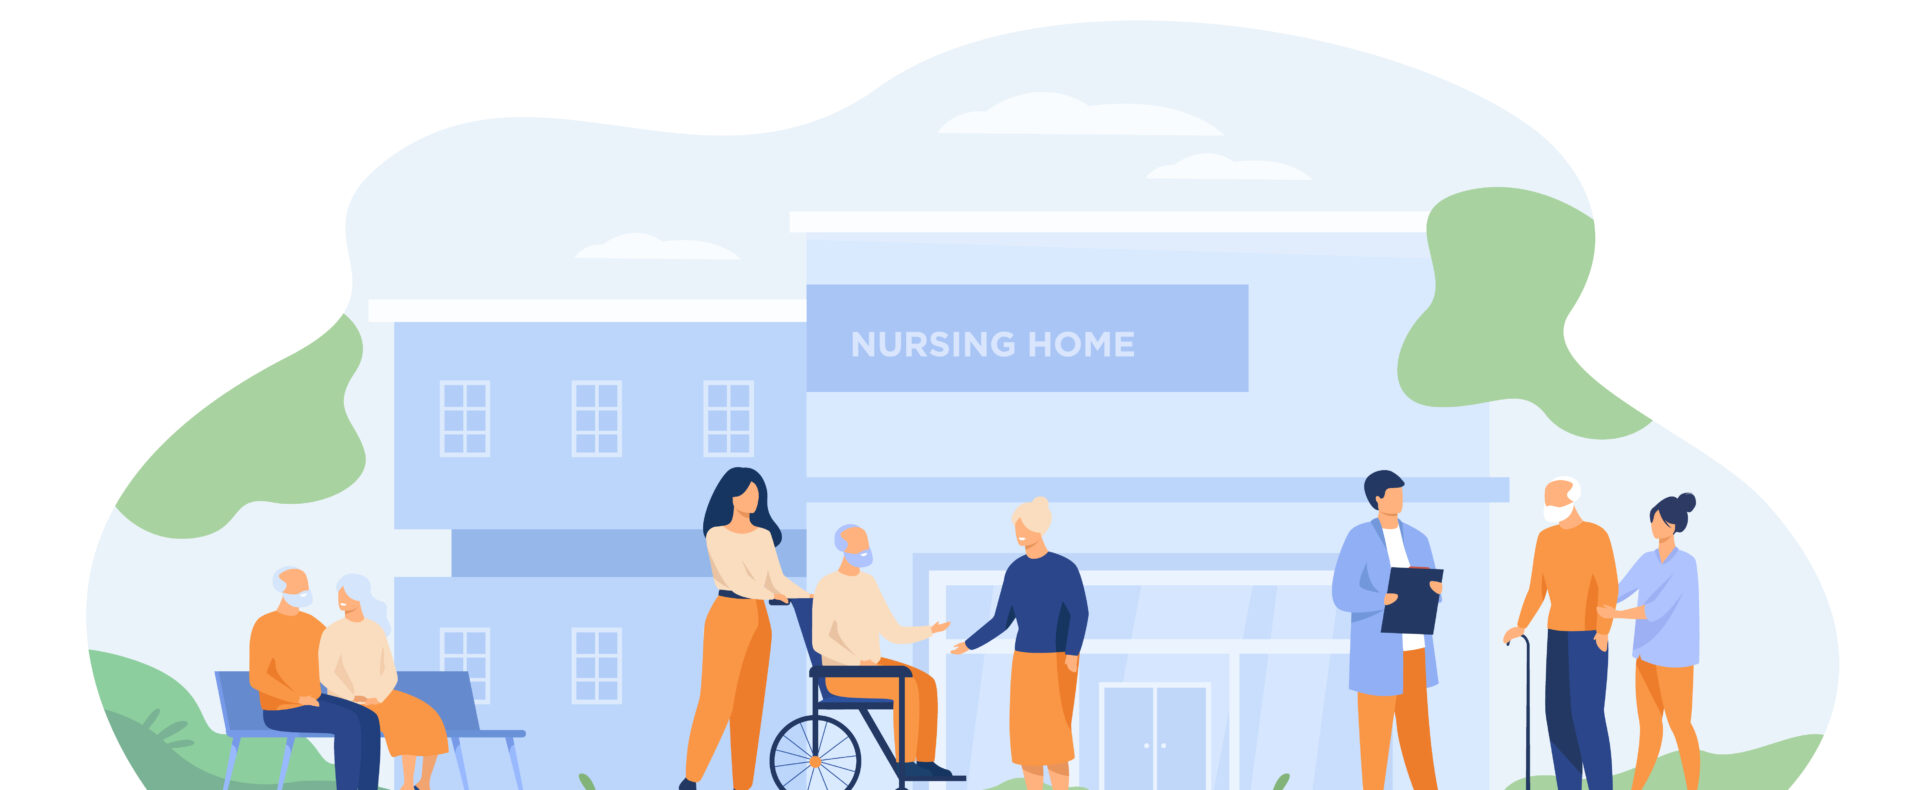 Nursing home residents. Old people walking outside with caregivers and visitors. Vector illustration for elderly care, age, retirement, hospice concept